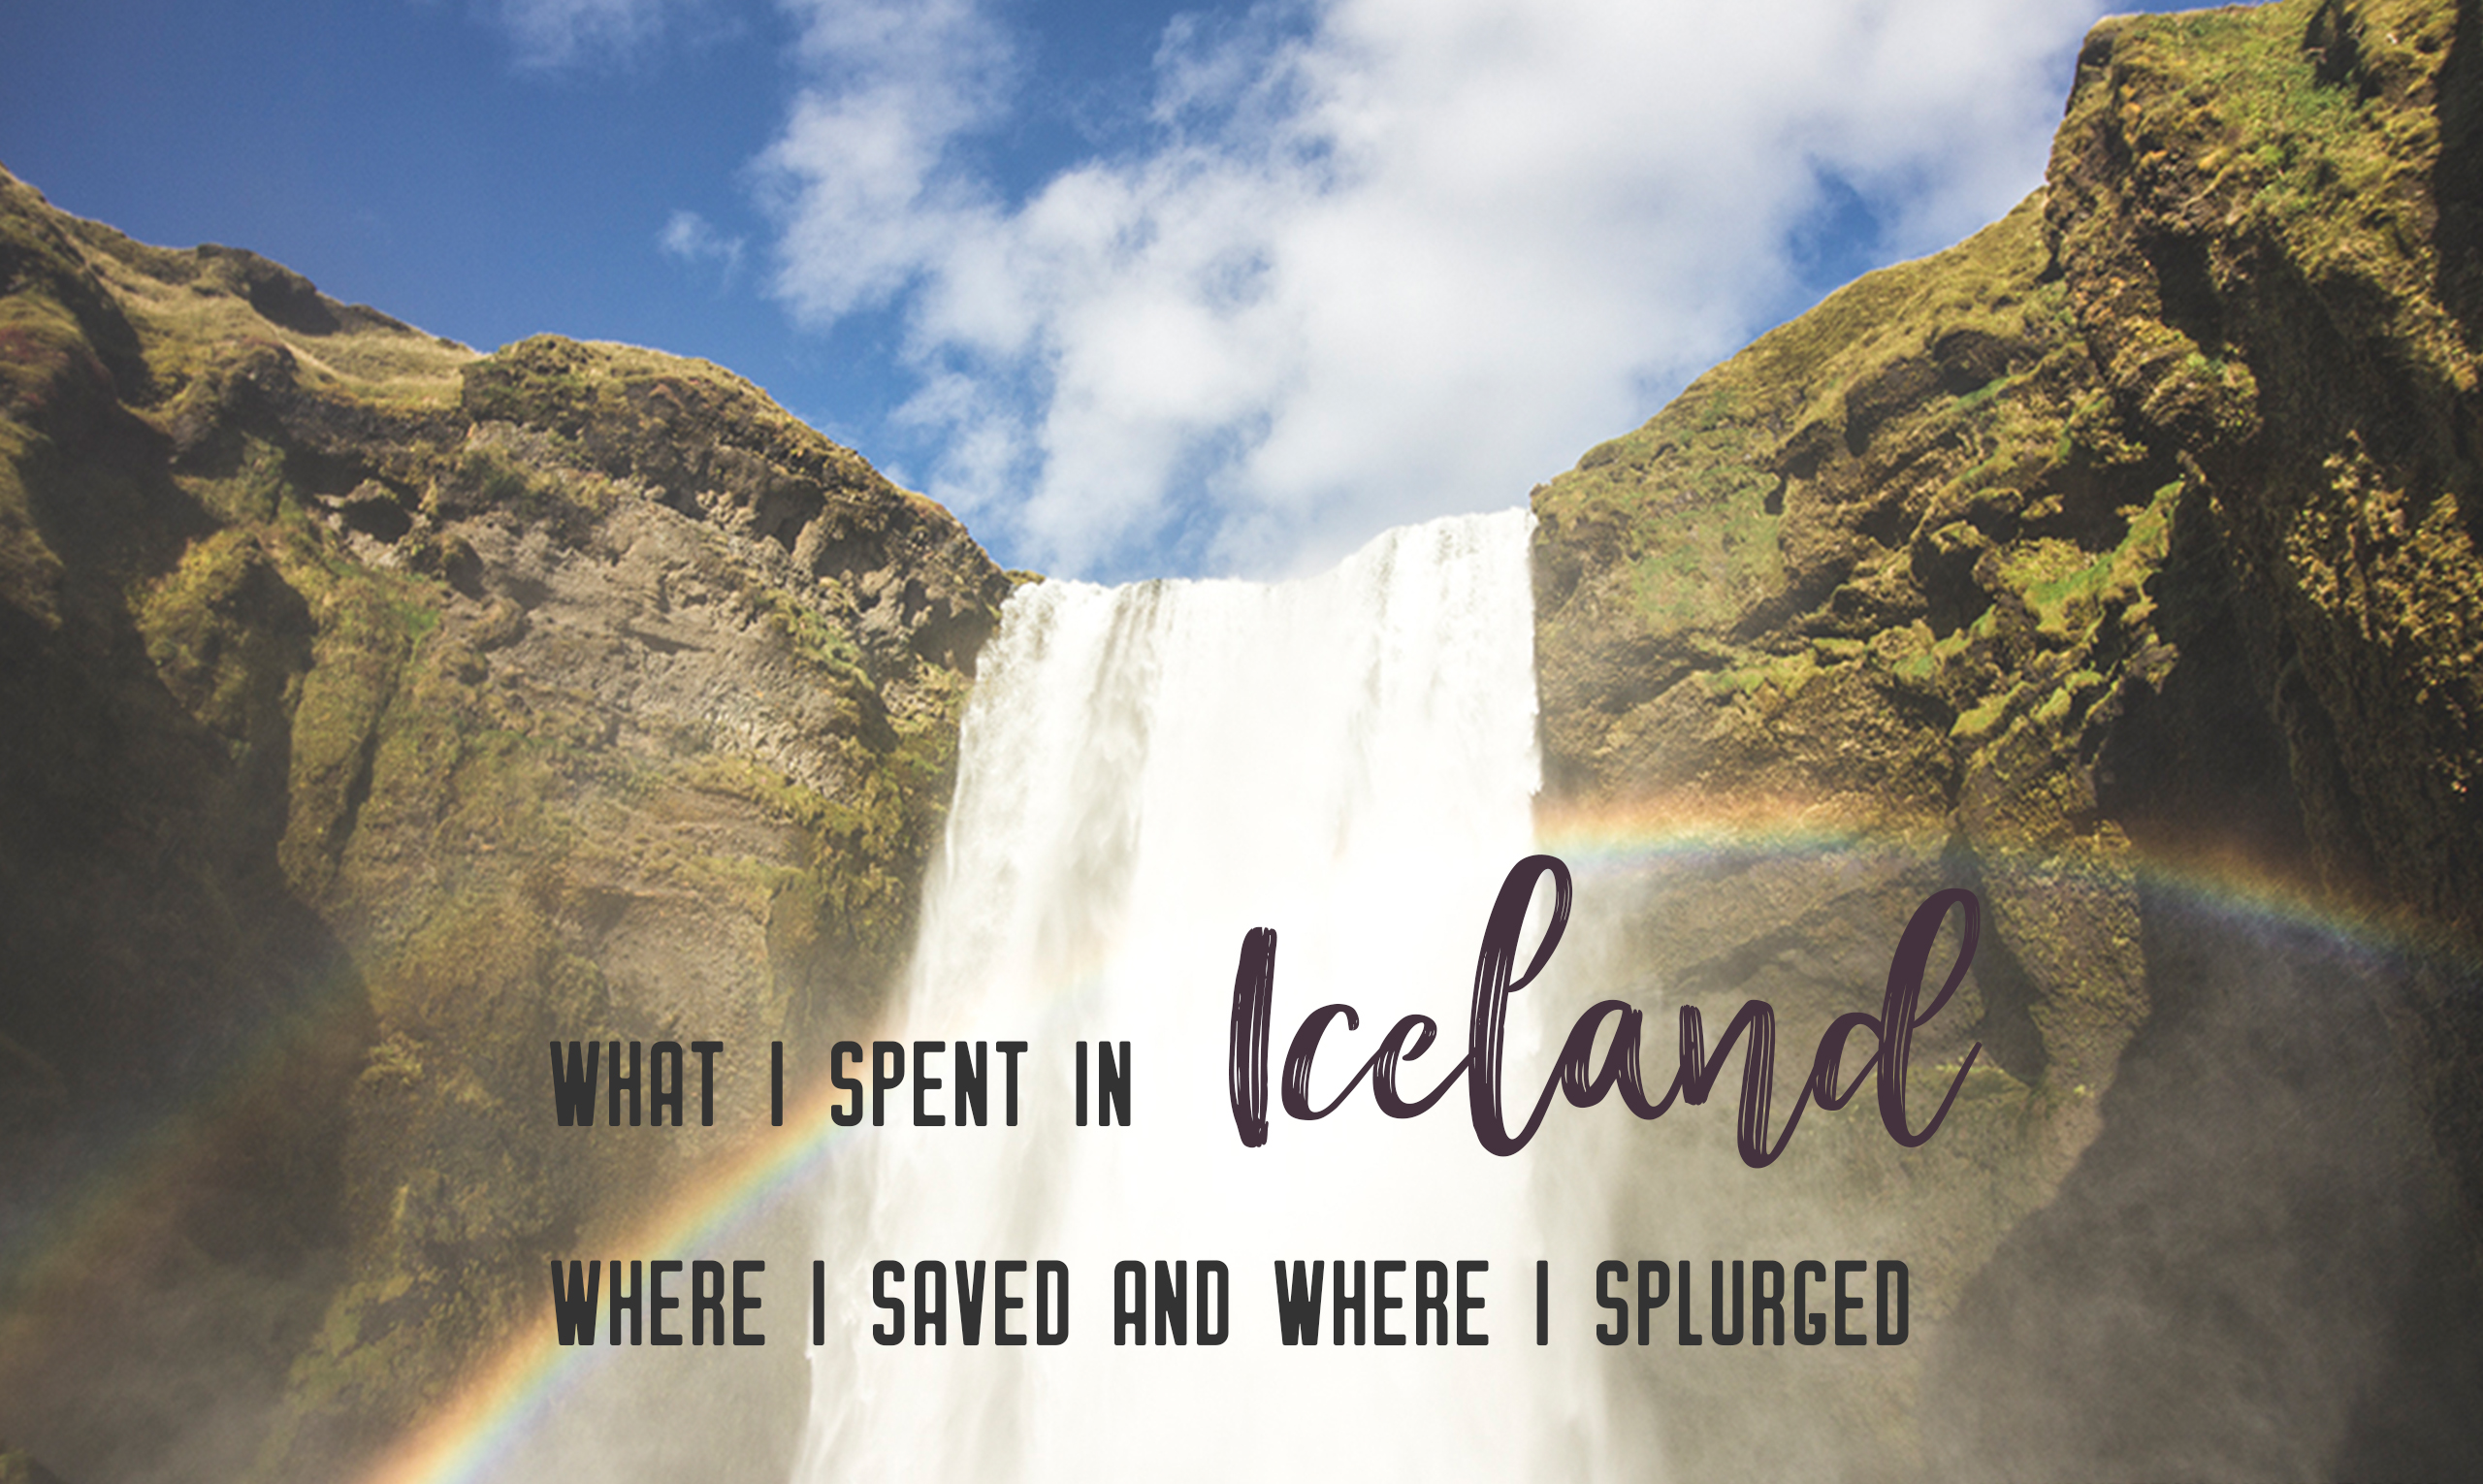 Iceland is known for being cheap to get to but expensive to stay and explore. I’ll walk you through what I spent in Iceland. Free travel budget planner. | My Wandering Voyage travel blog